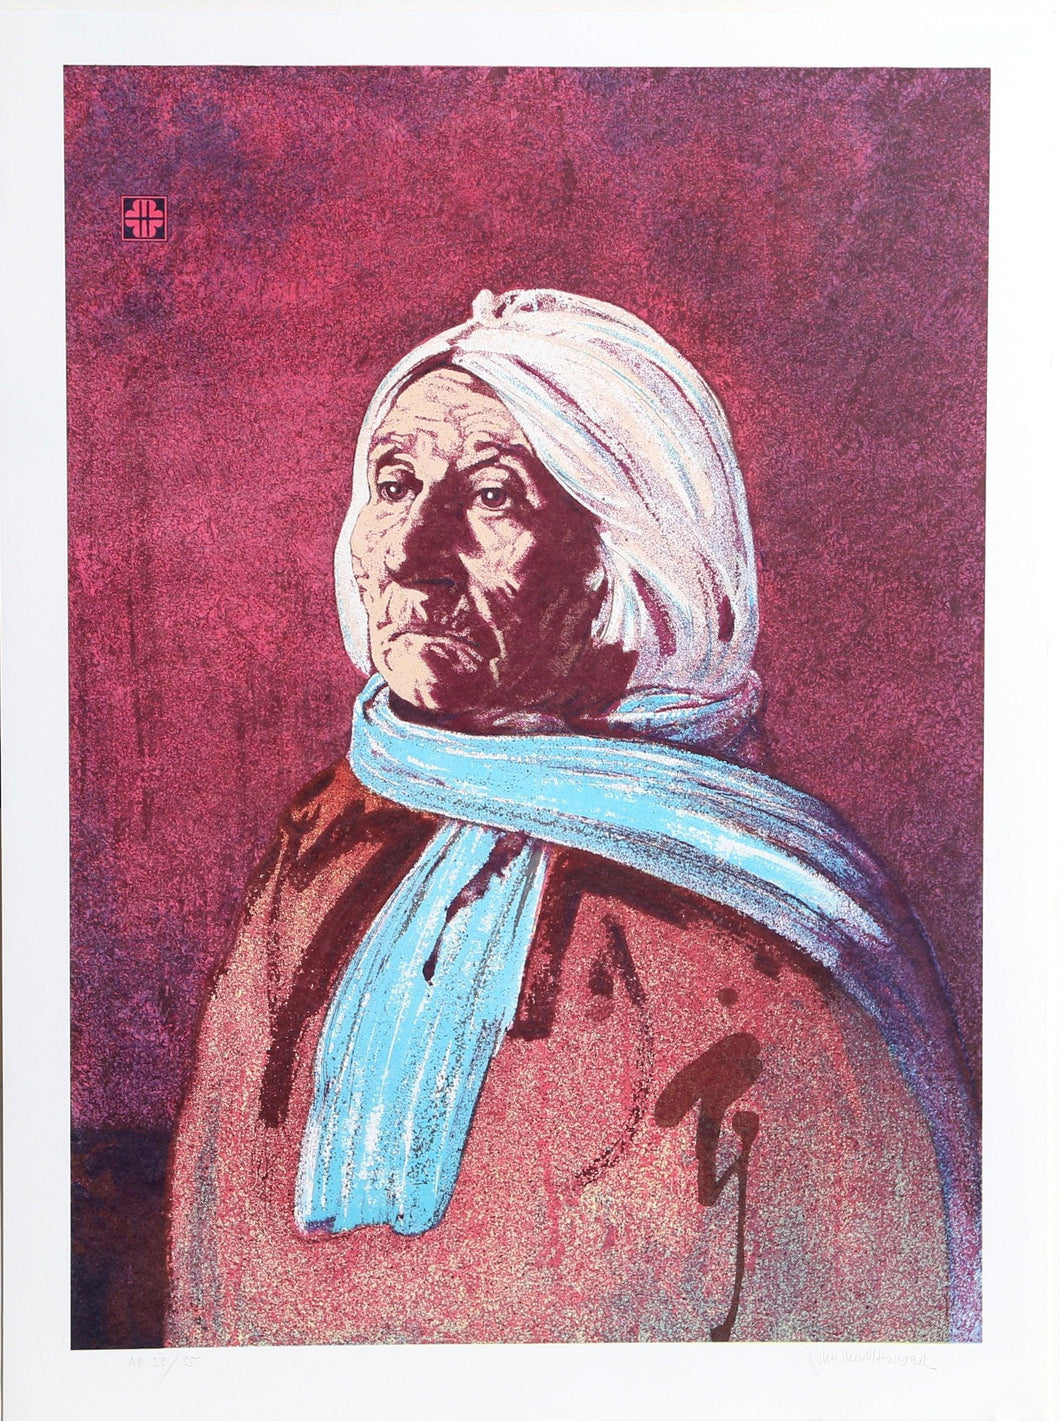 Portrait of a Native American Woman Lithograph | John Sherrill Houser,{{product.type}}